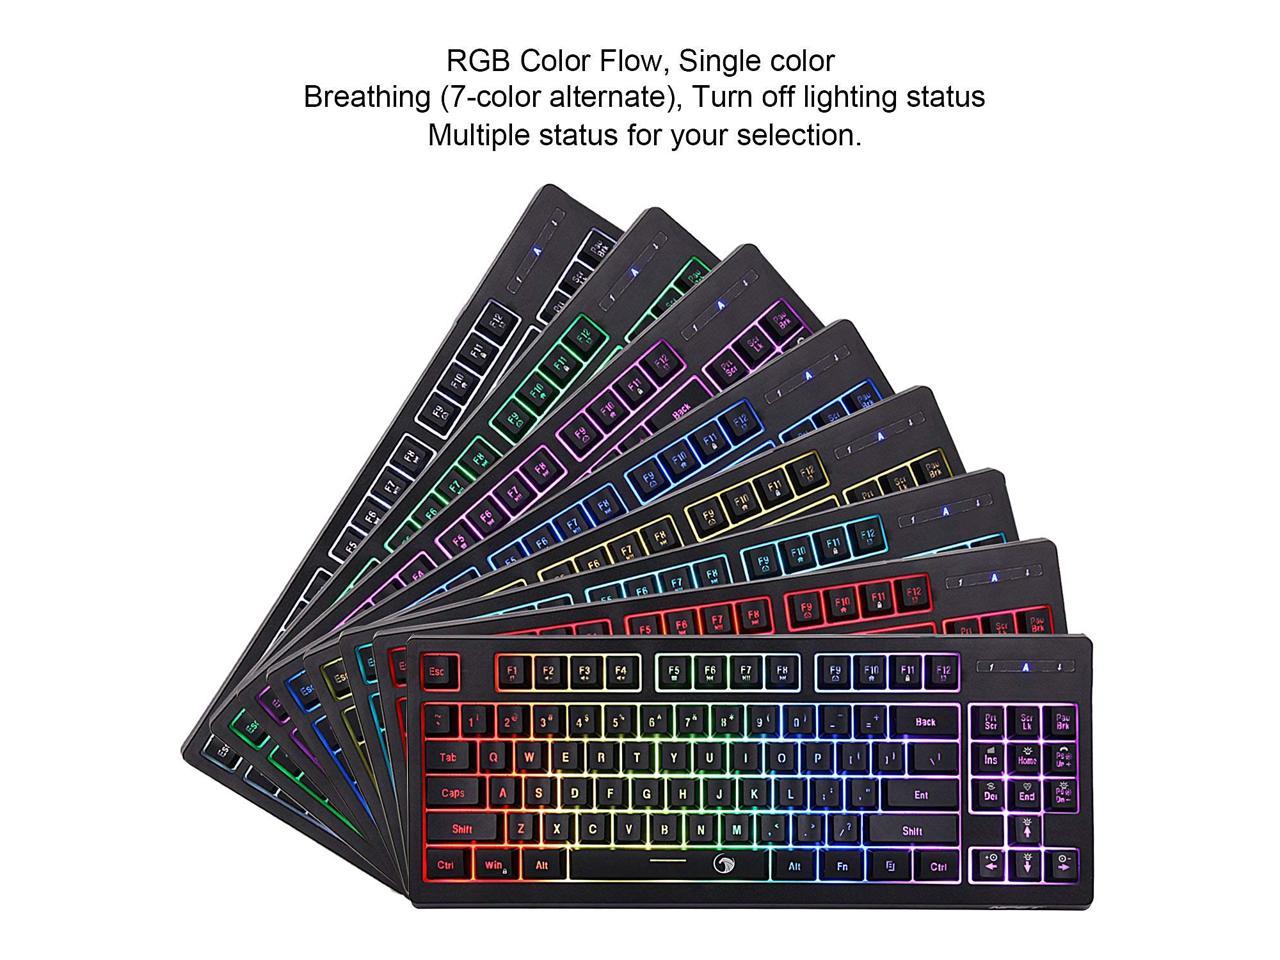 USB Wired Anti-Ghosting and Water Resistant Membrane Keyboard for PC/Laptop/Desktop/Computer NPET G11 Gaming Keyboard 87 Keys Small Compact Rainbow Backlit Keyboard 